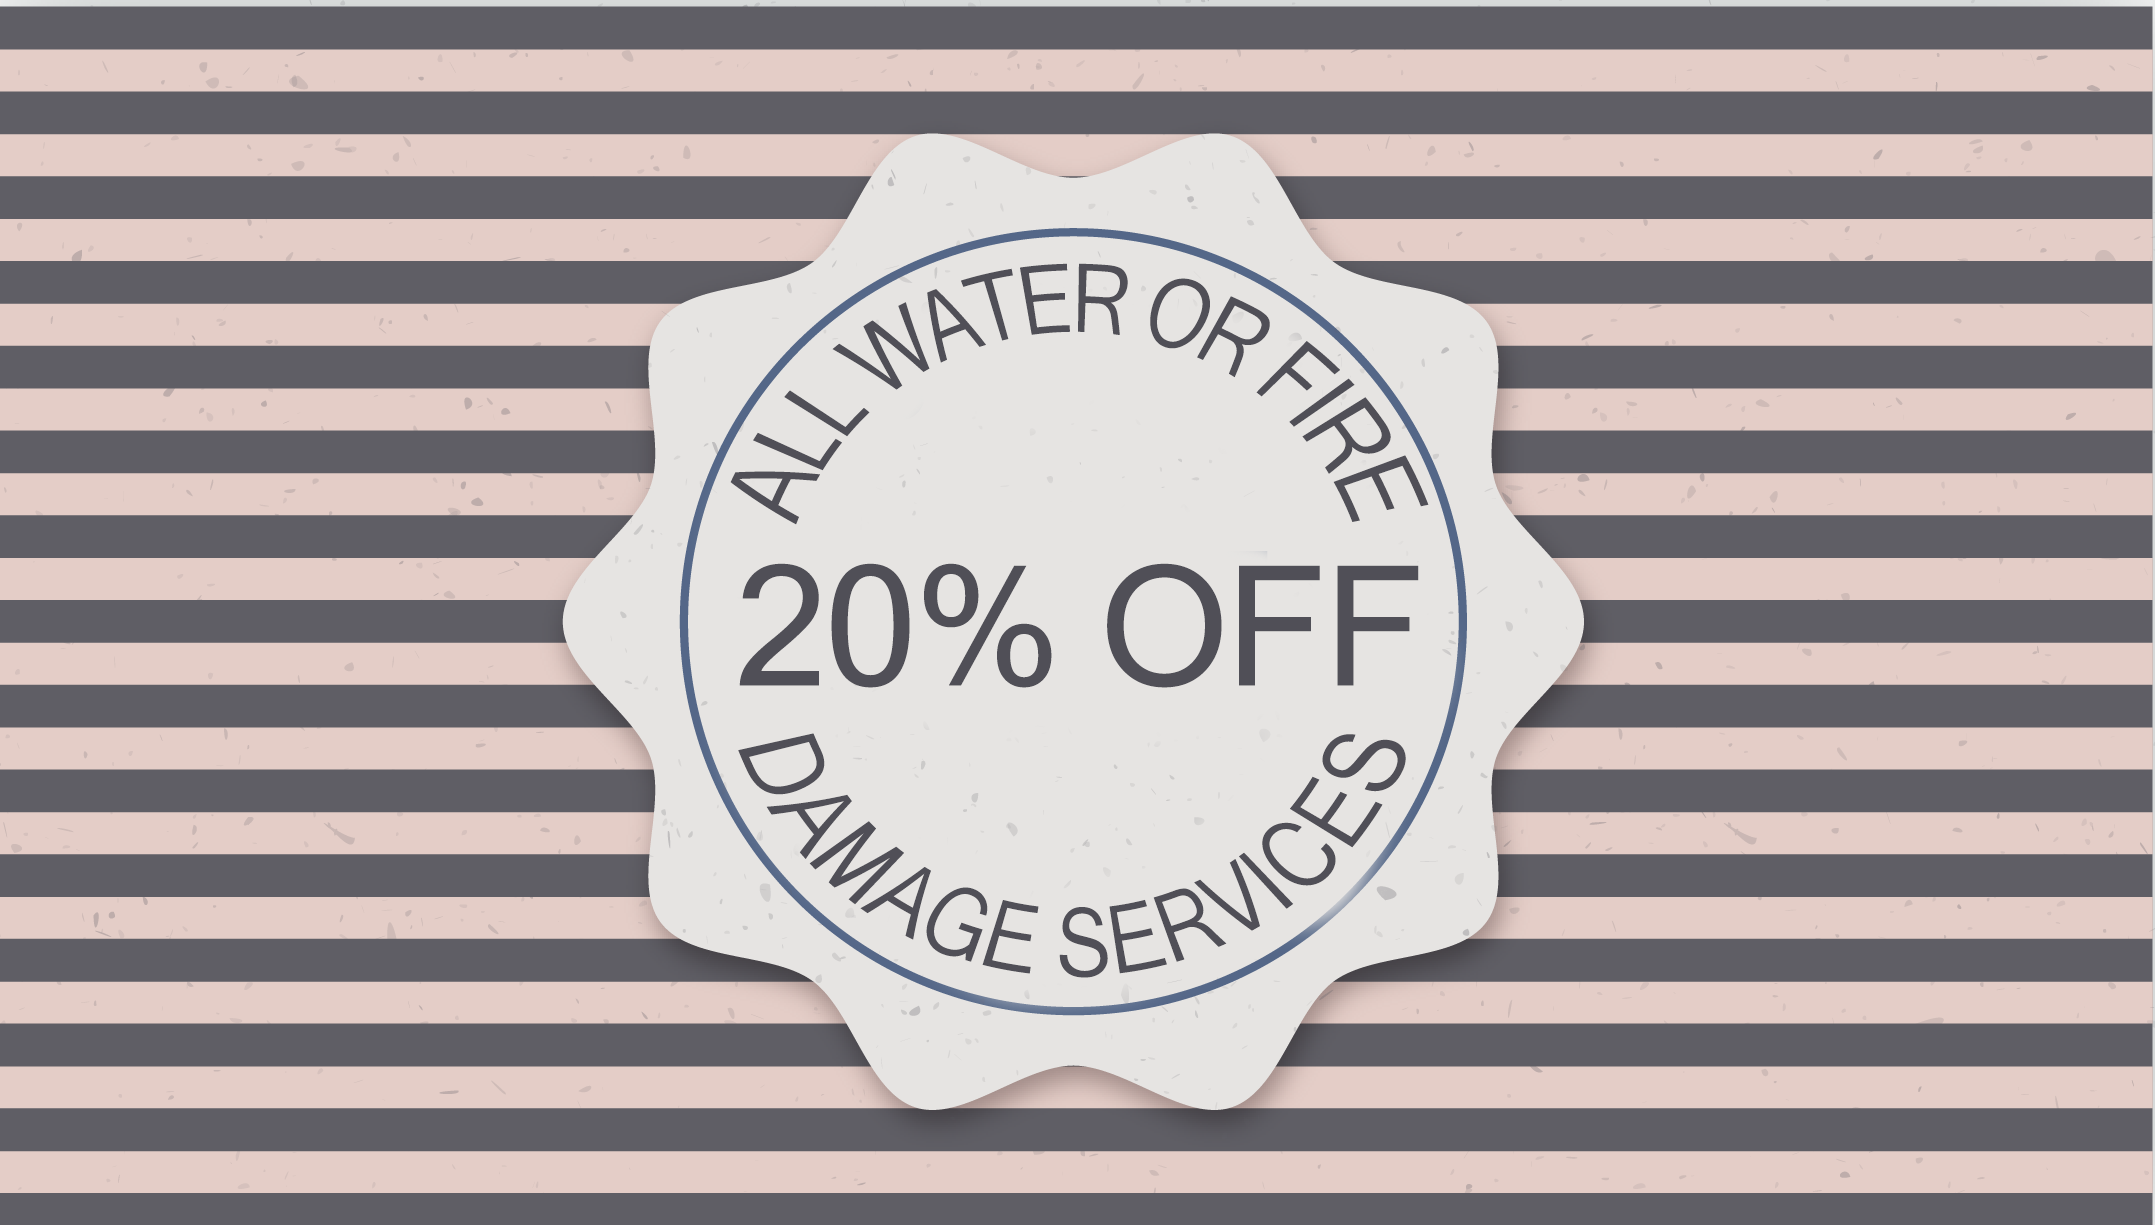 20 OFF ALL WATER OR FIRE DAMAGE SERVICES